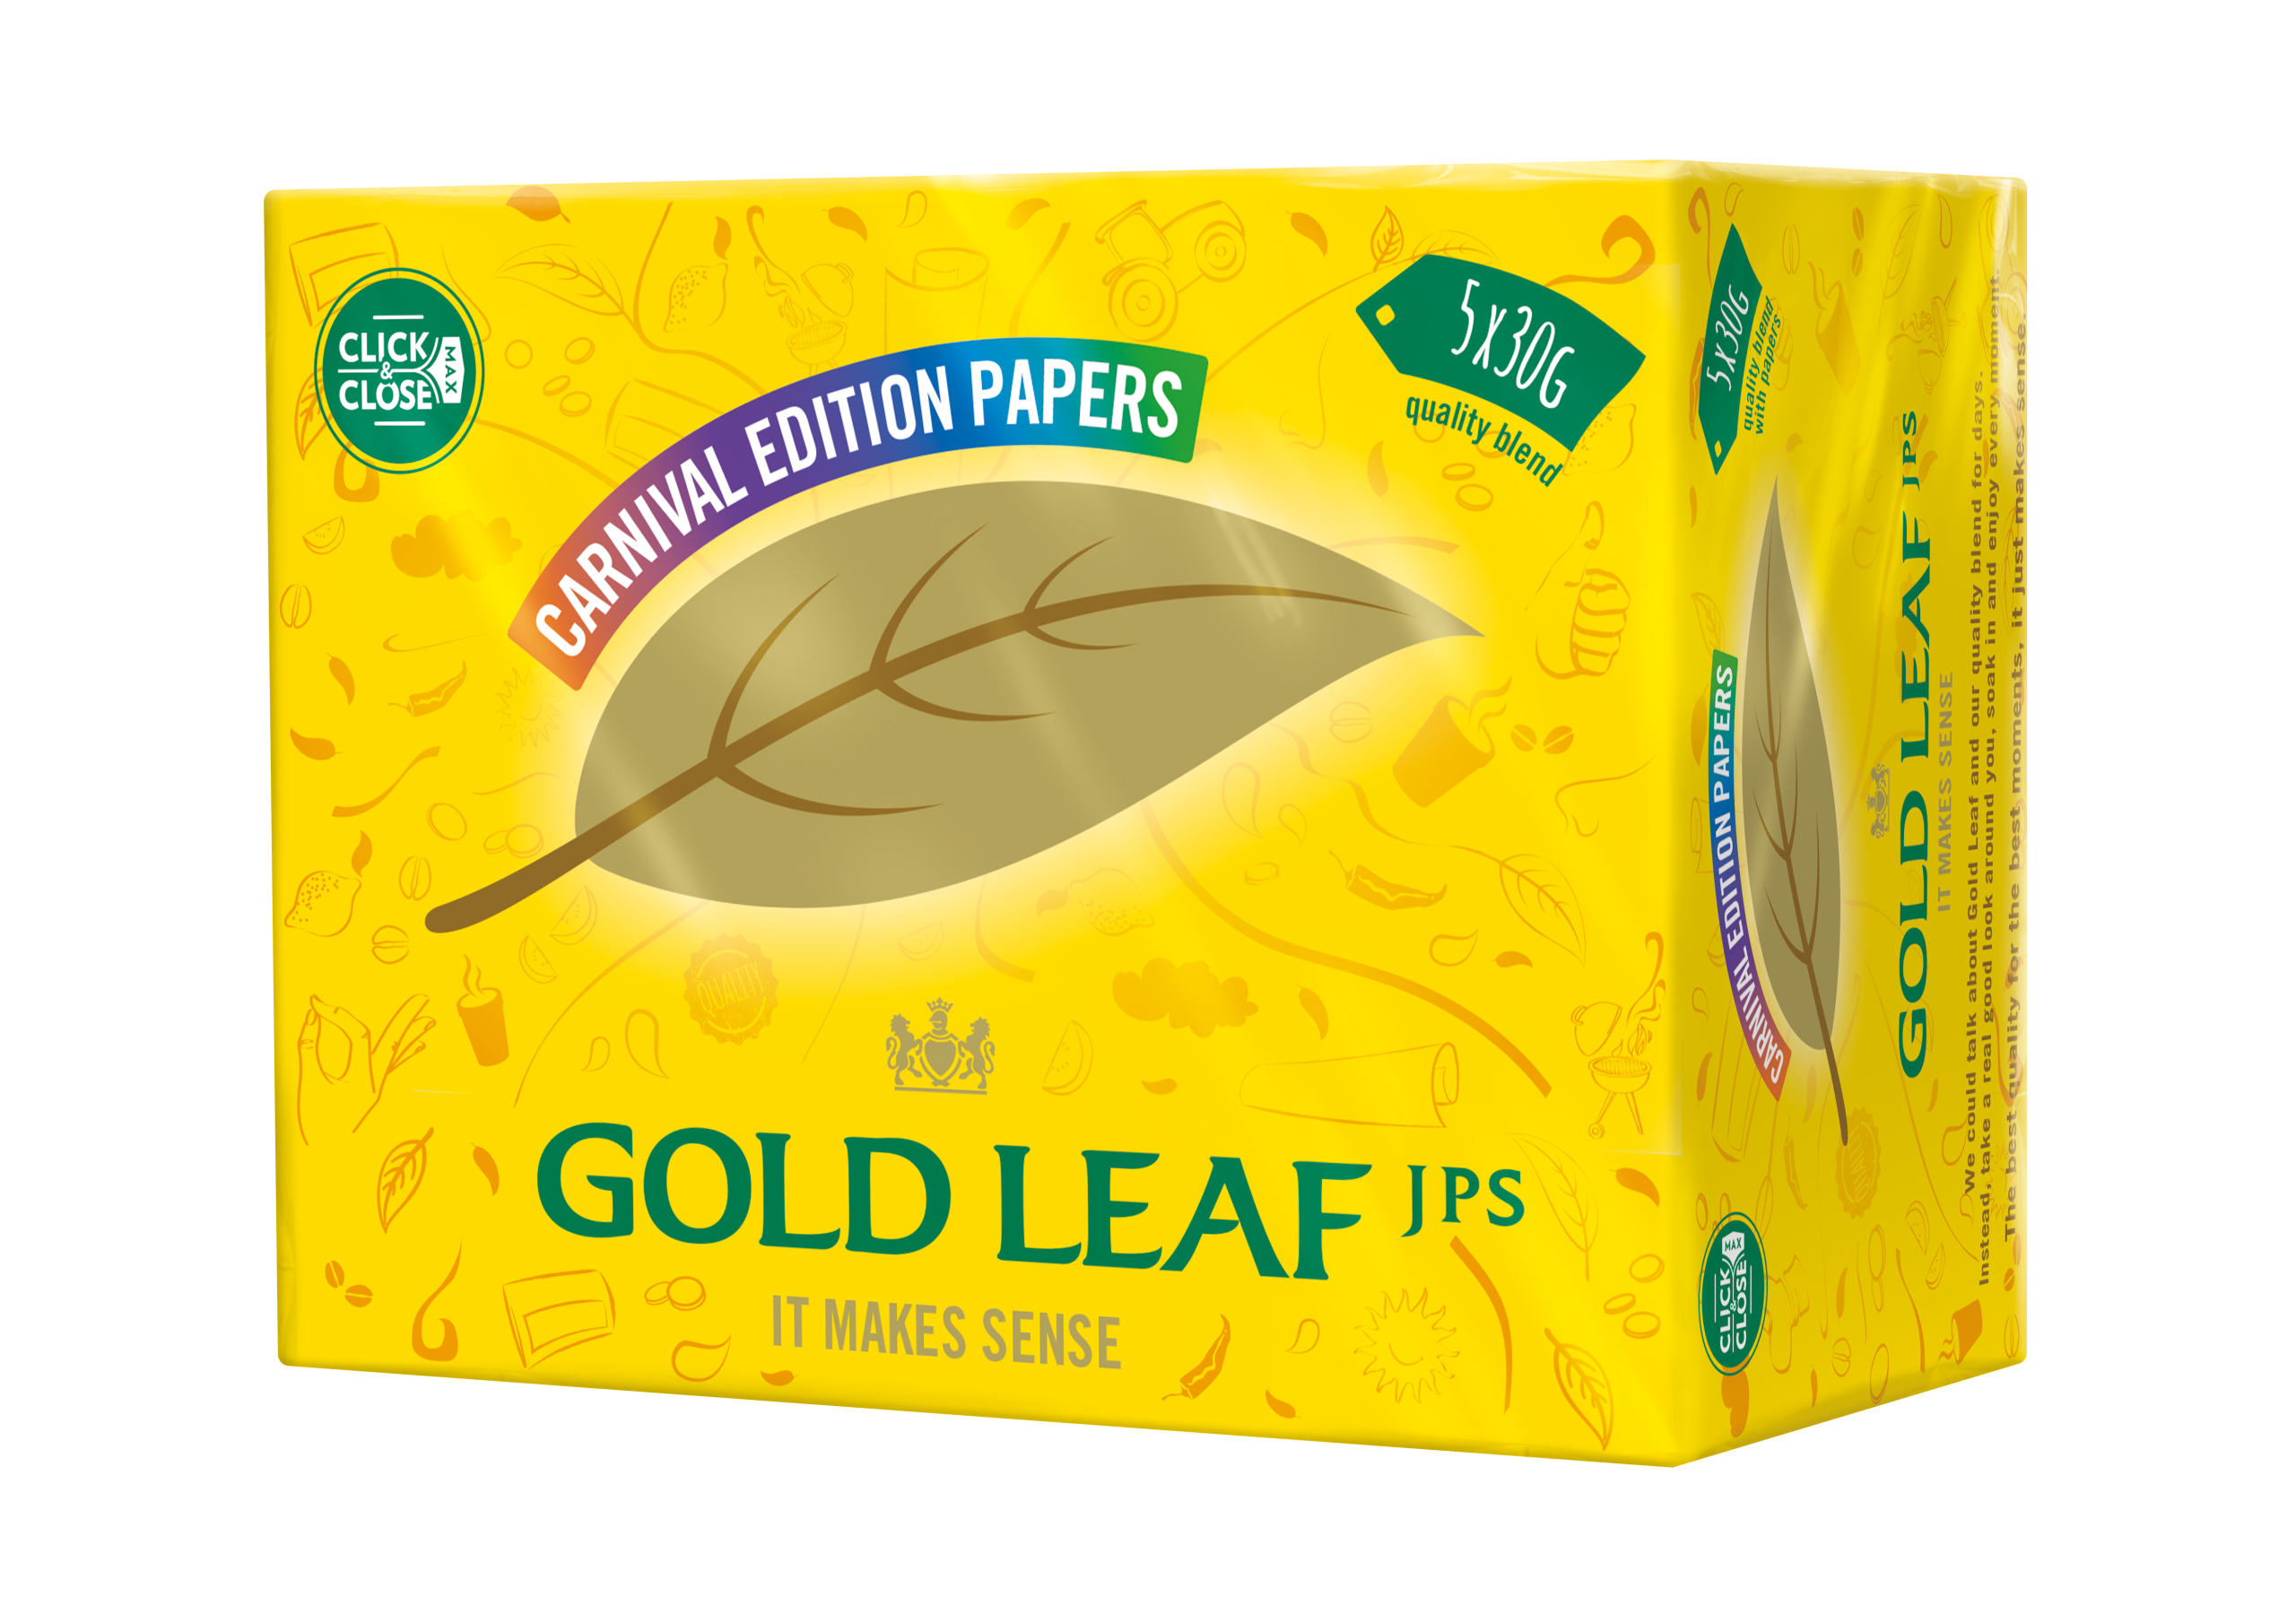 Gold Leaf releases The Spirit of Carnival limited edition papers